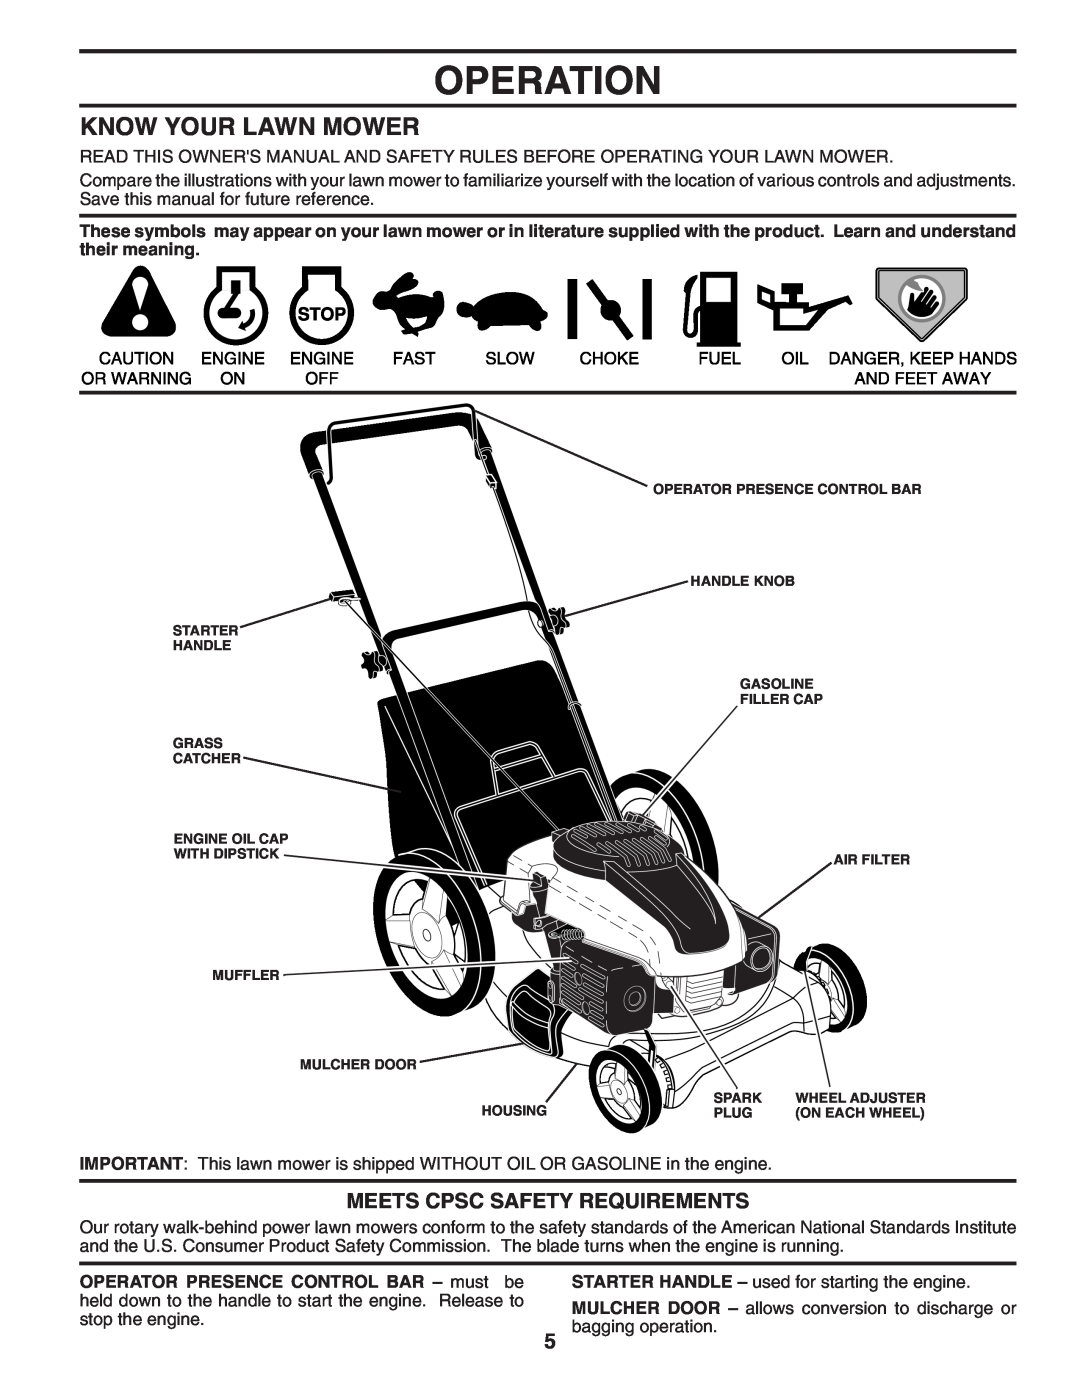 Husqvarna 6021P manual Operation, Know Your Lawn Mower, Meets Cpsc Safety Requirements 